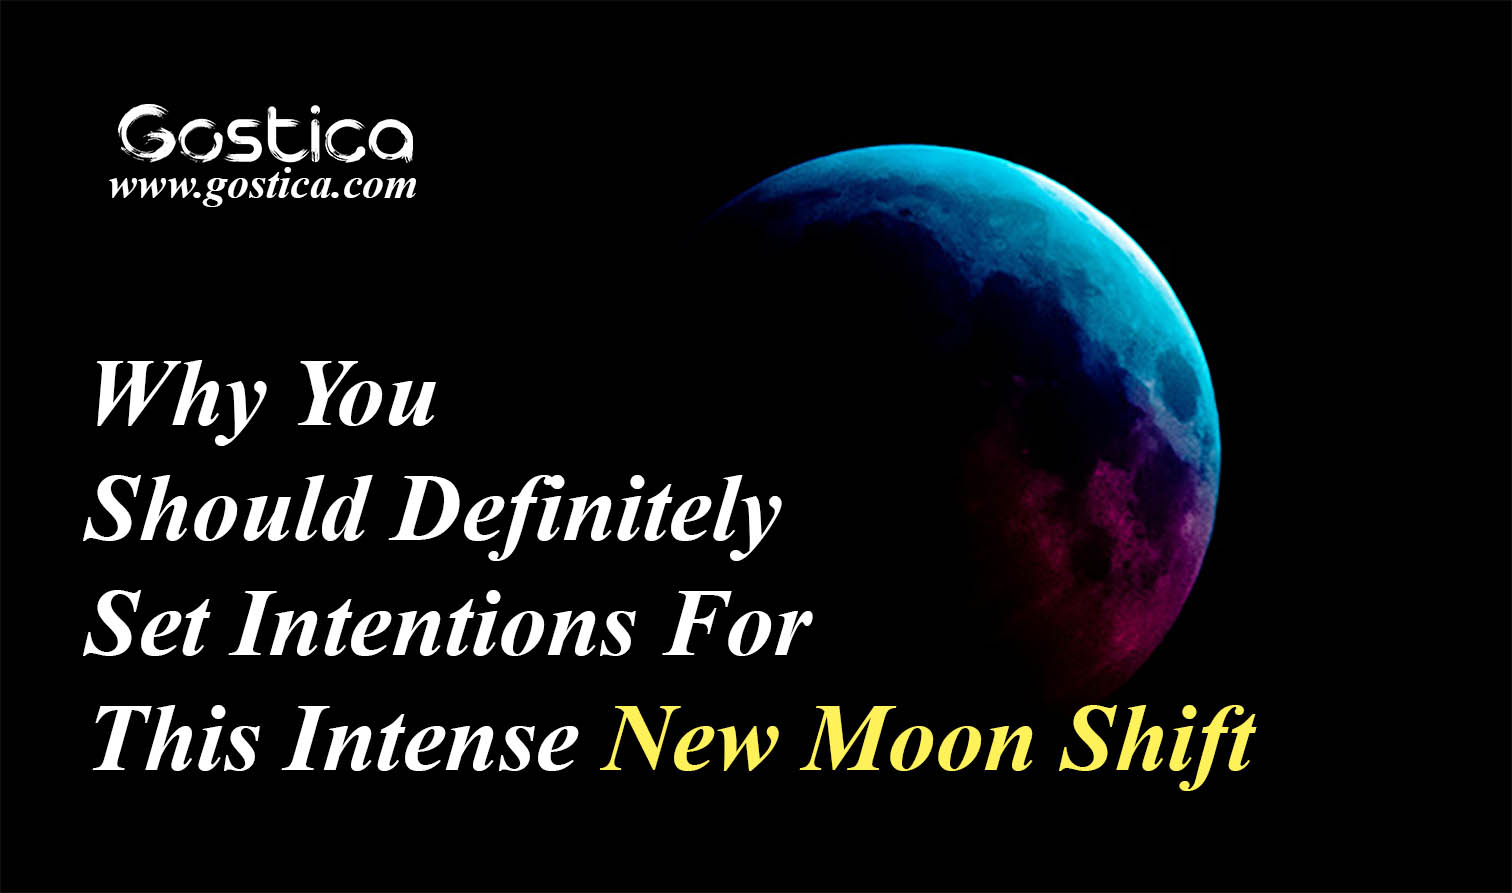 Why-You-Should-Definitely-Set-Intentions-For-This-Intense-New-Moon-Shift.jpg